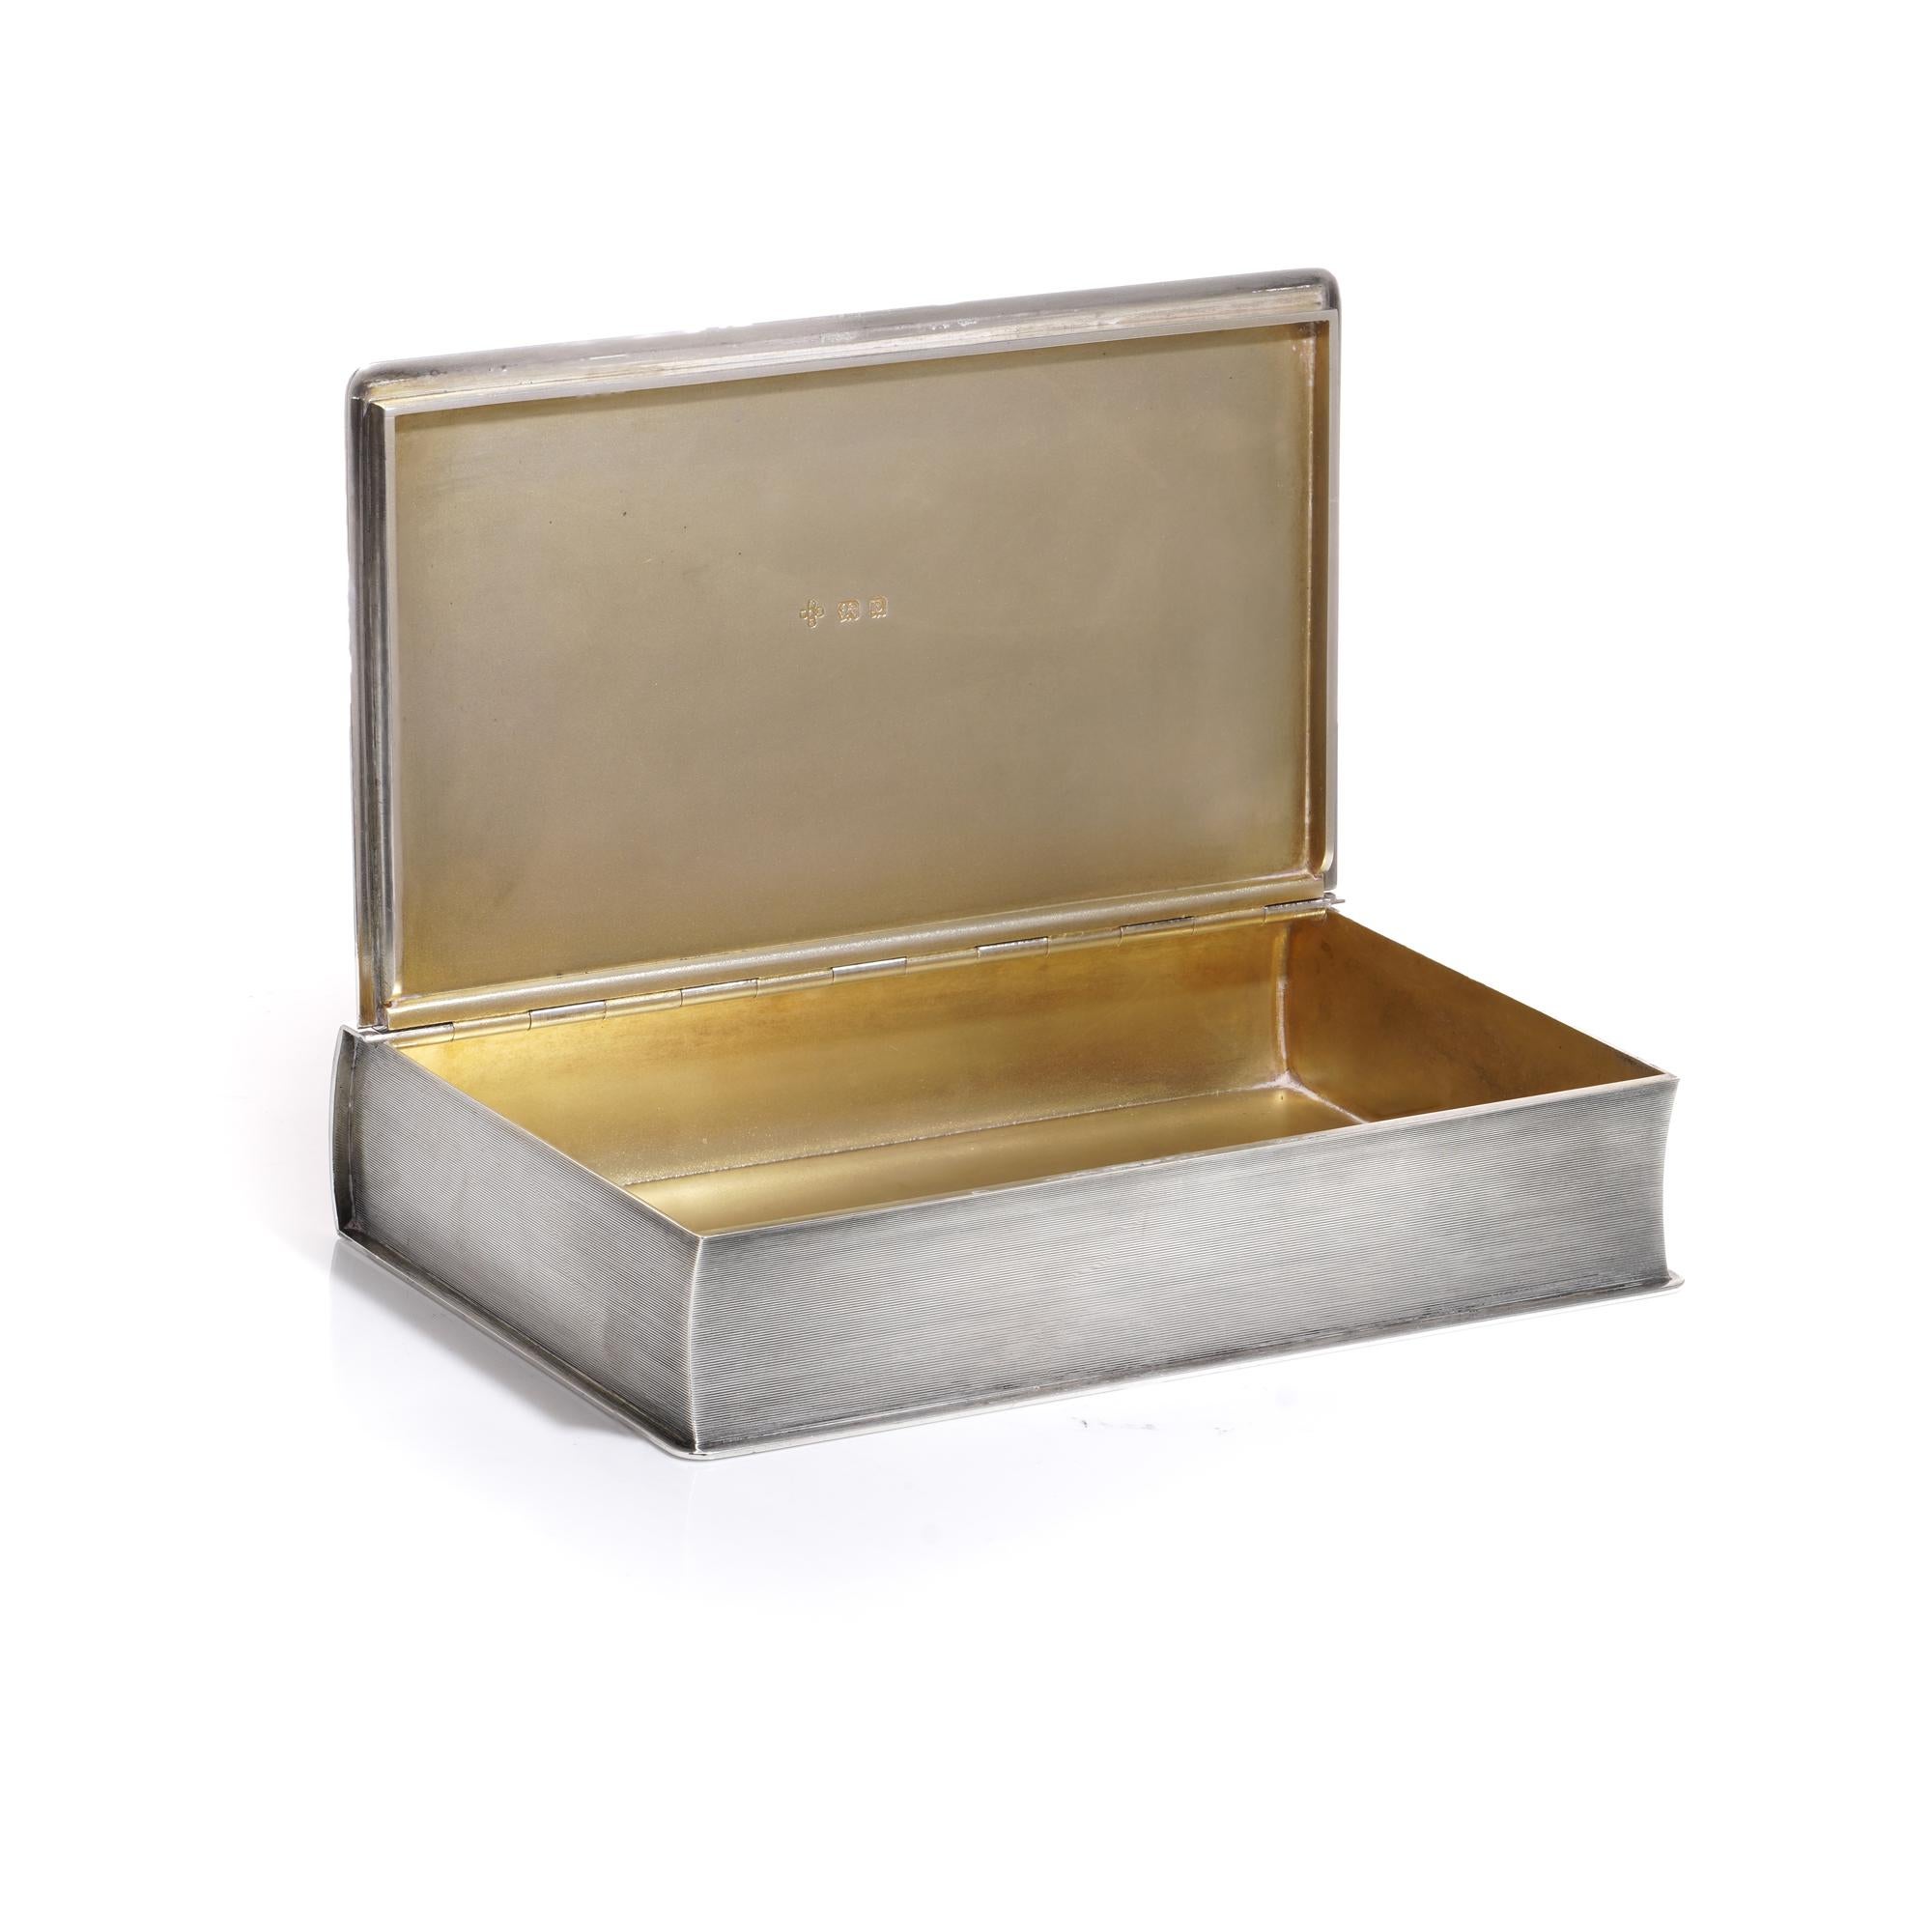 Art Deco sterling silver 925 sandwich/cigarette box featuring a silver gilt interior. The box is crafted in a book-style shape with engine-turned decoration.
Maker: William Base & Sons
Made in the United Kingdom, Birmingham, 1929 
Fully hallmarked